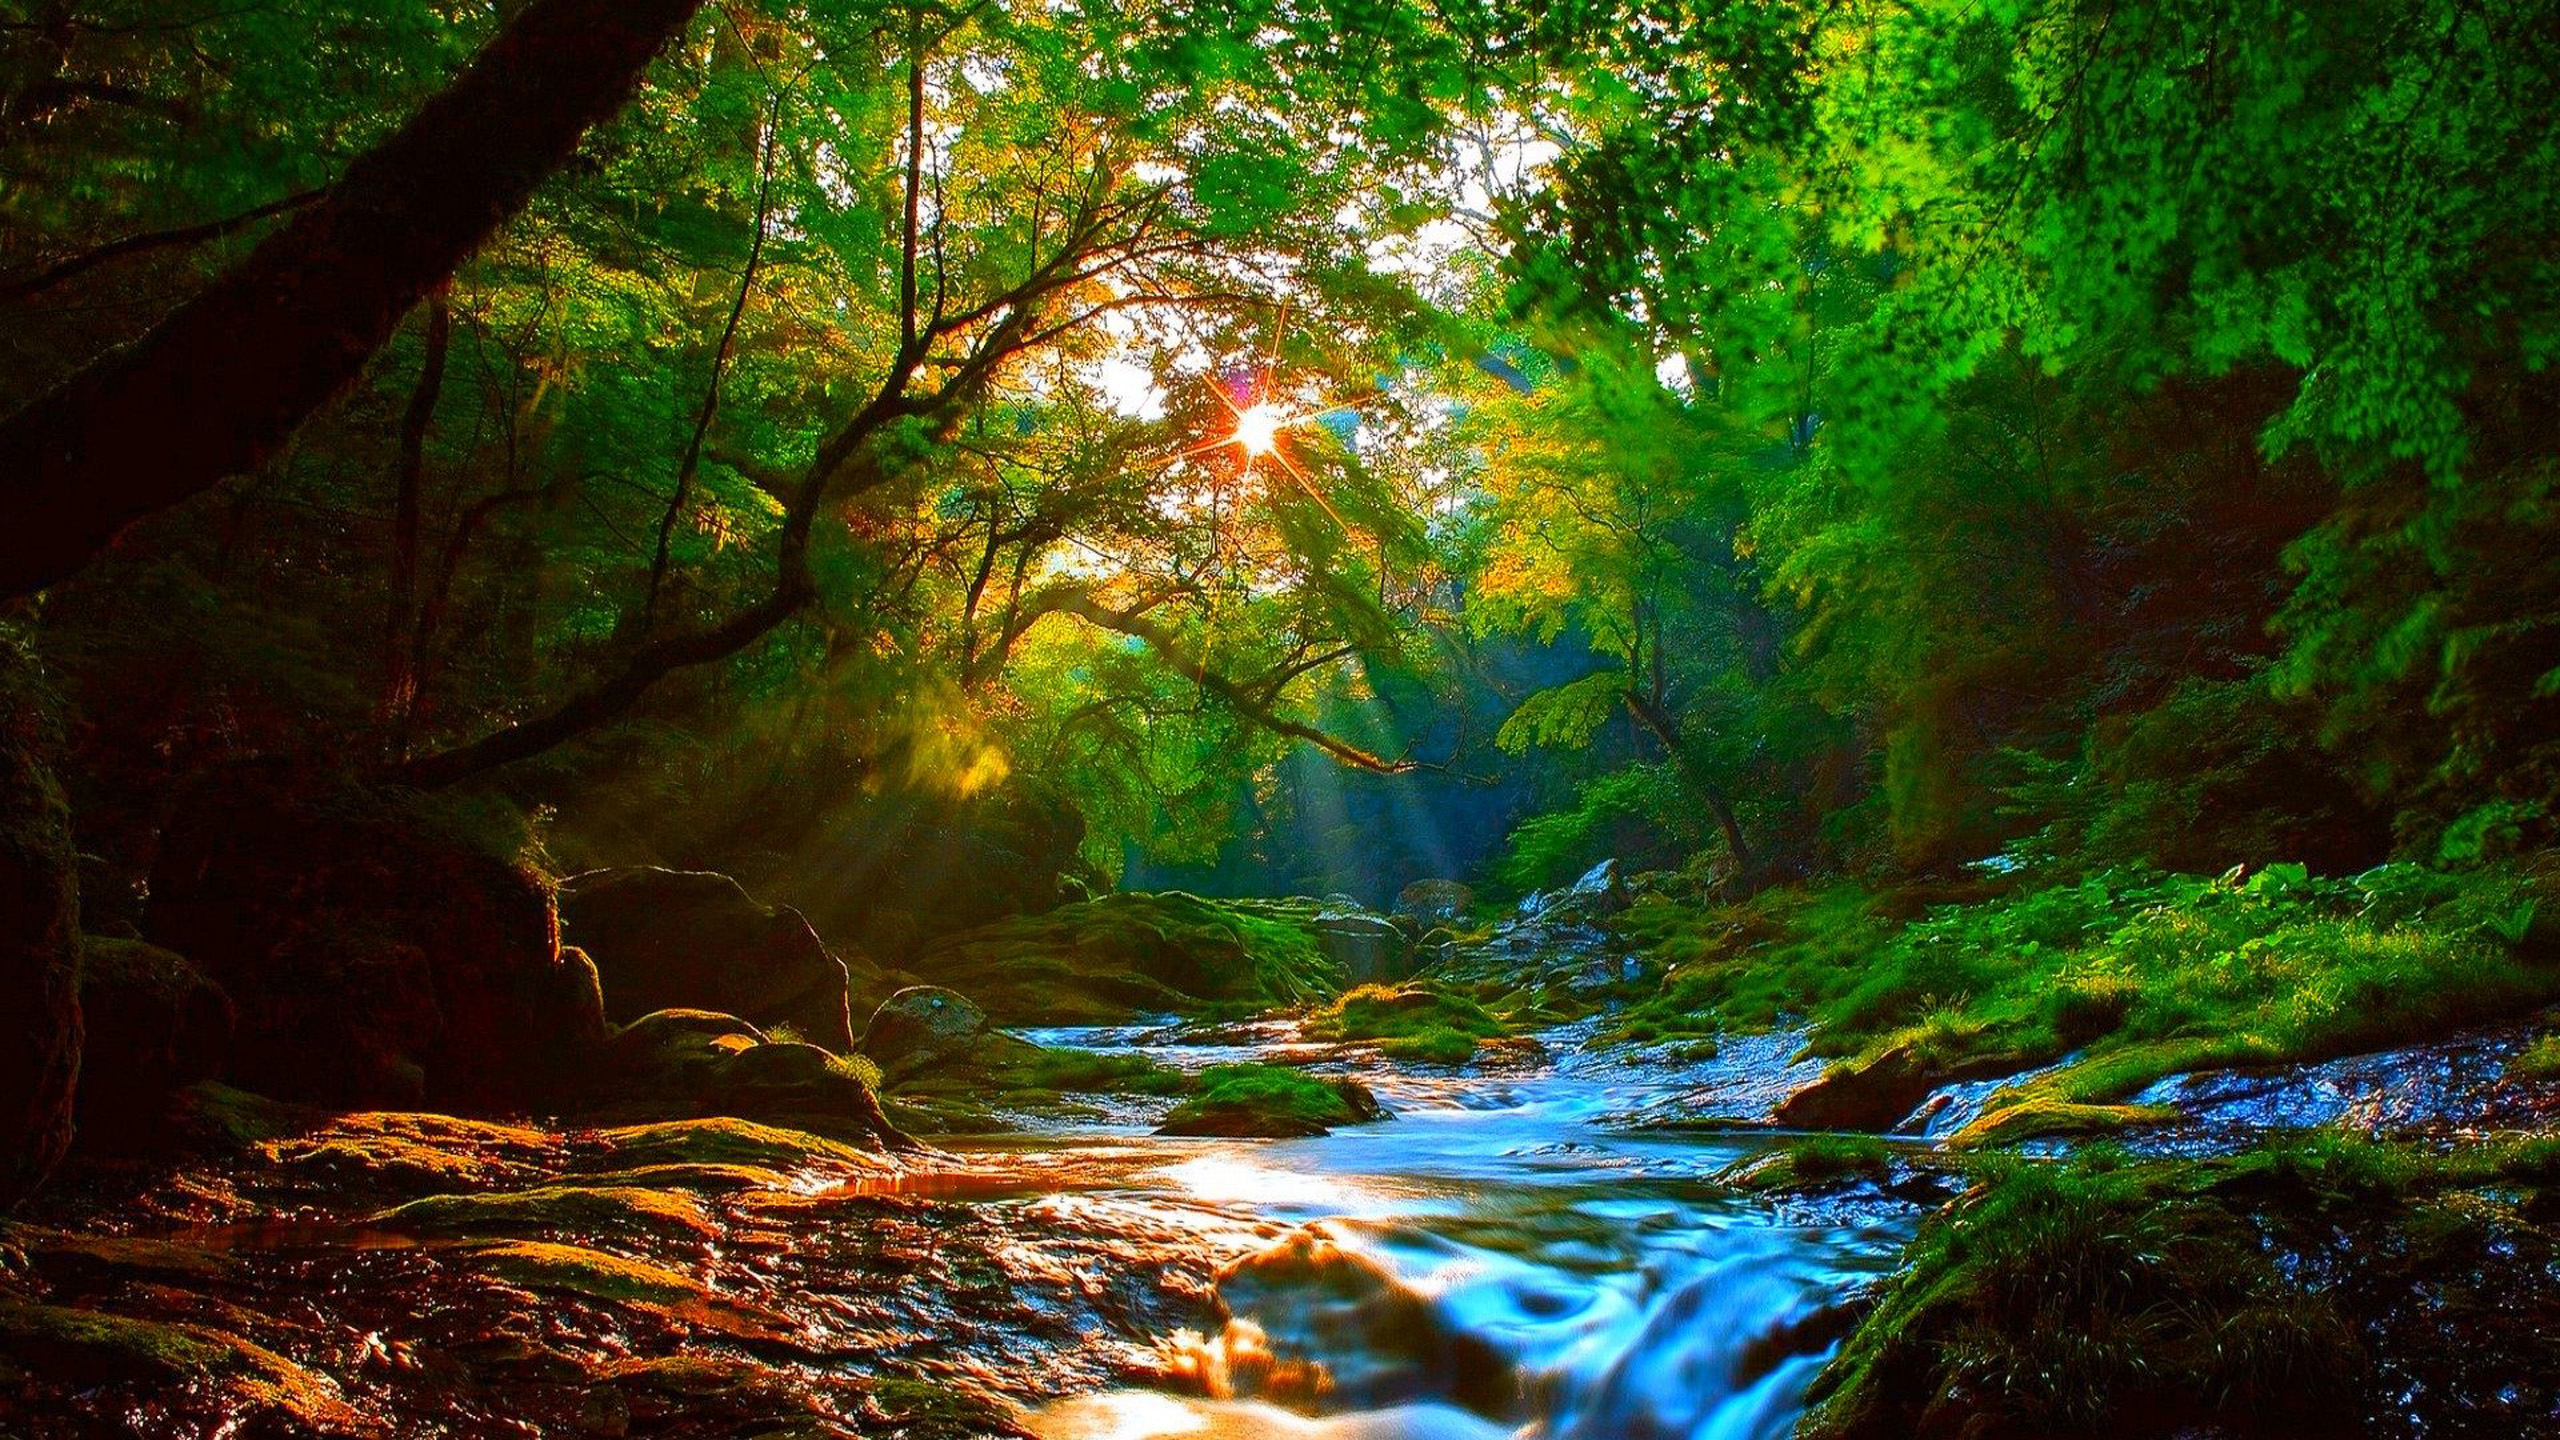 Sunrise Beautiful Mountainous River Forest With Green